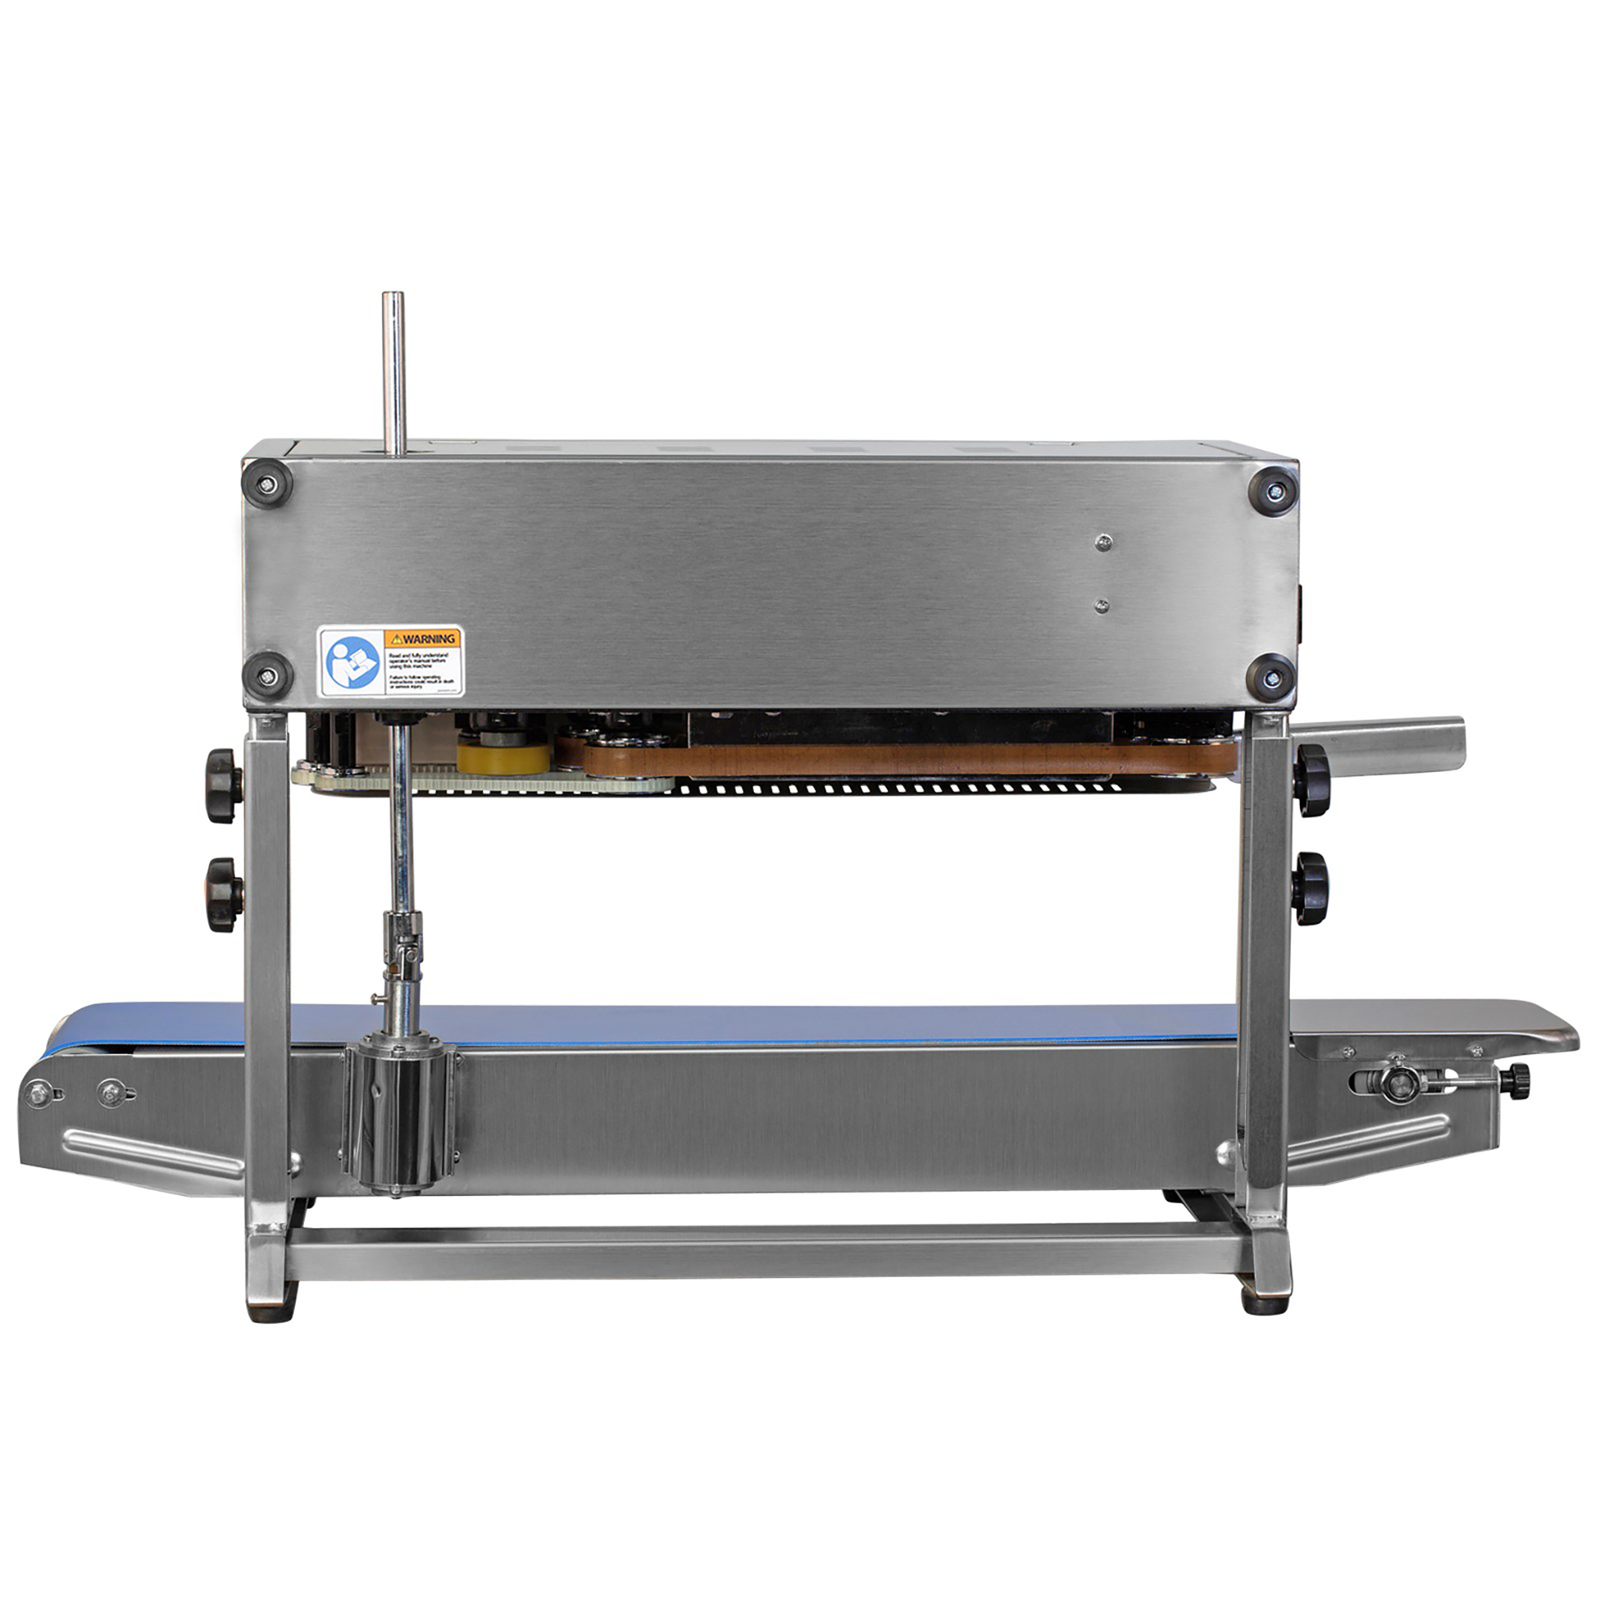 Back view of the stainless steel JORESTECH left to right continuous band sealer used for sealing plastic bags 